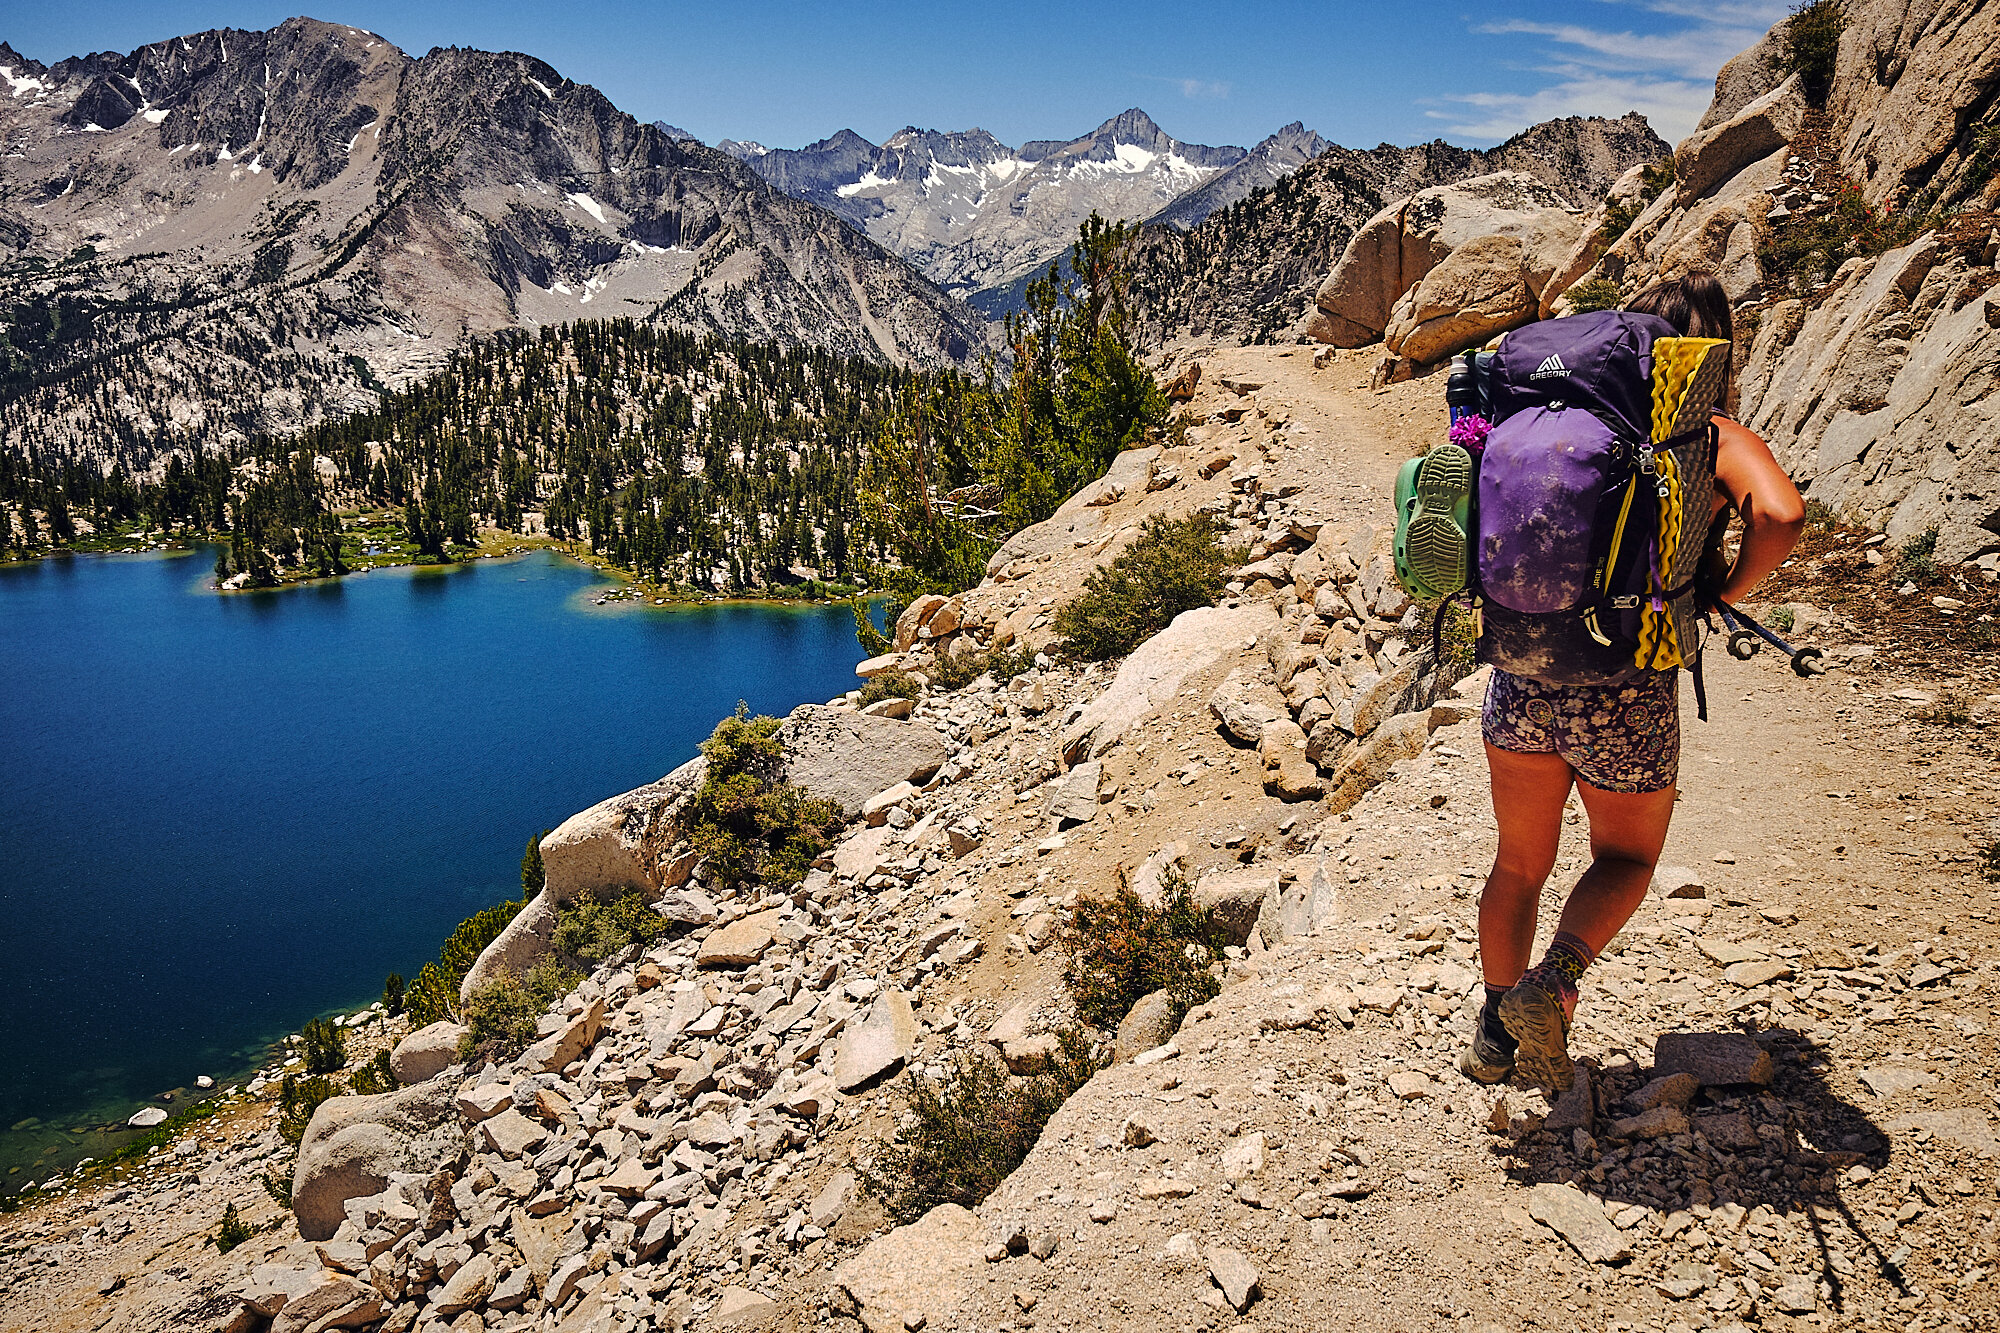  Flower hikes down from Kearsarge Pass to join the Pacific Crest Trail. | 7/10/20 Independence, CA 